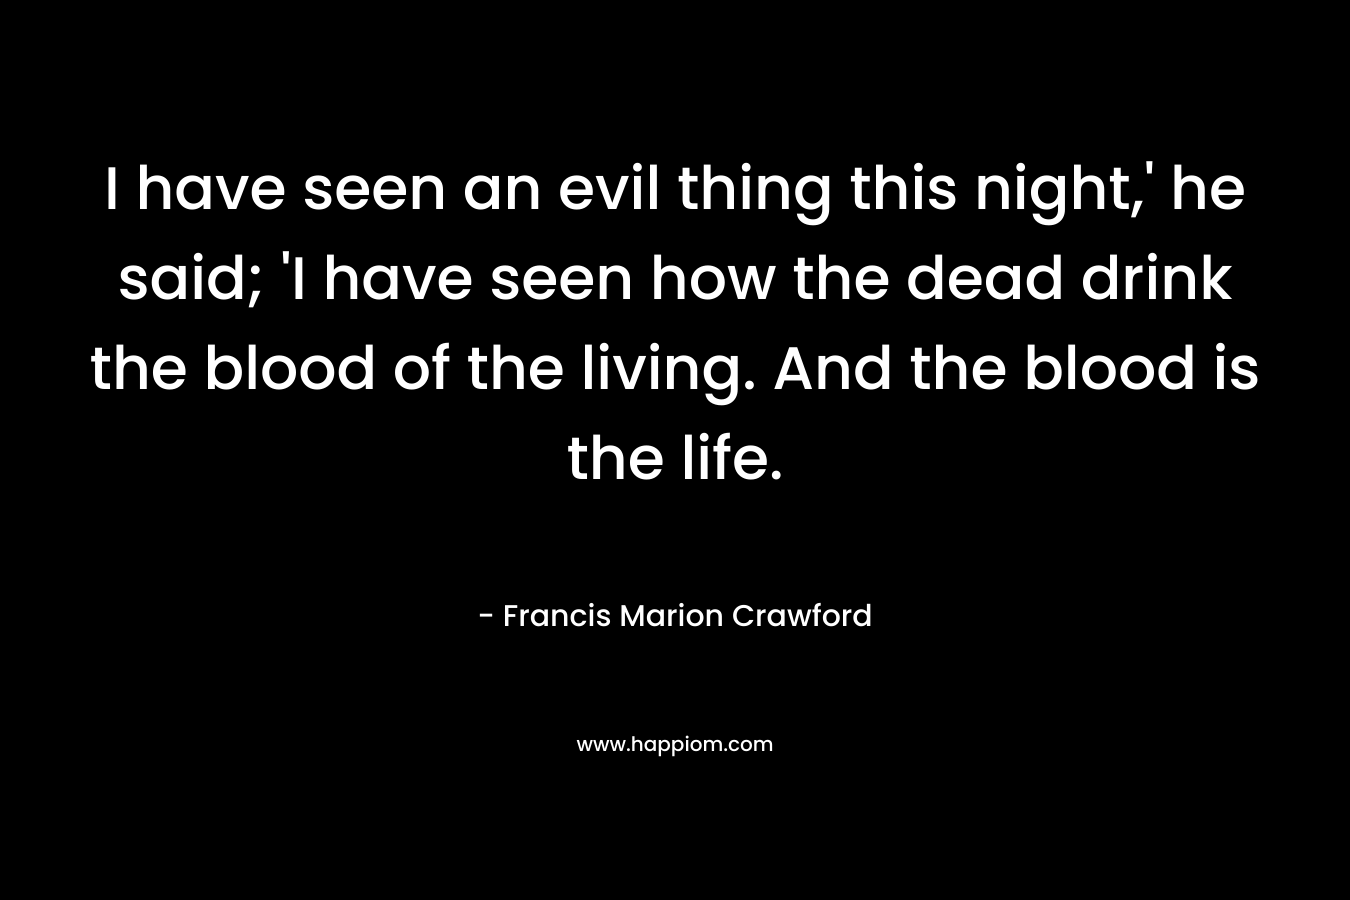 I have seen an evil thing this night,' he said; 'I have seen how the dead drink the blood of the living. And the blood is the life.